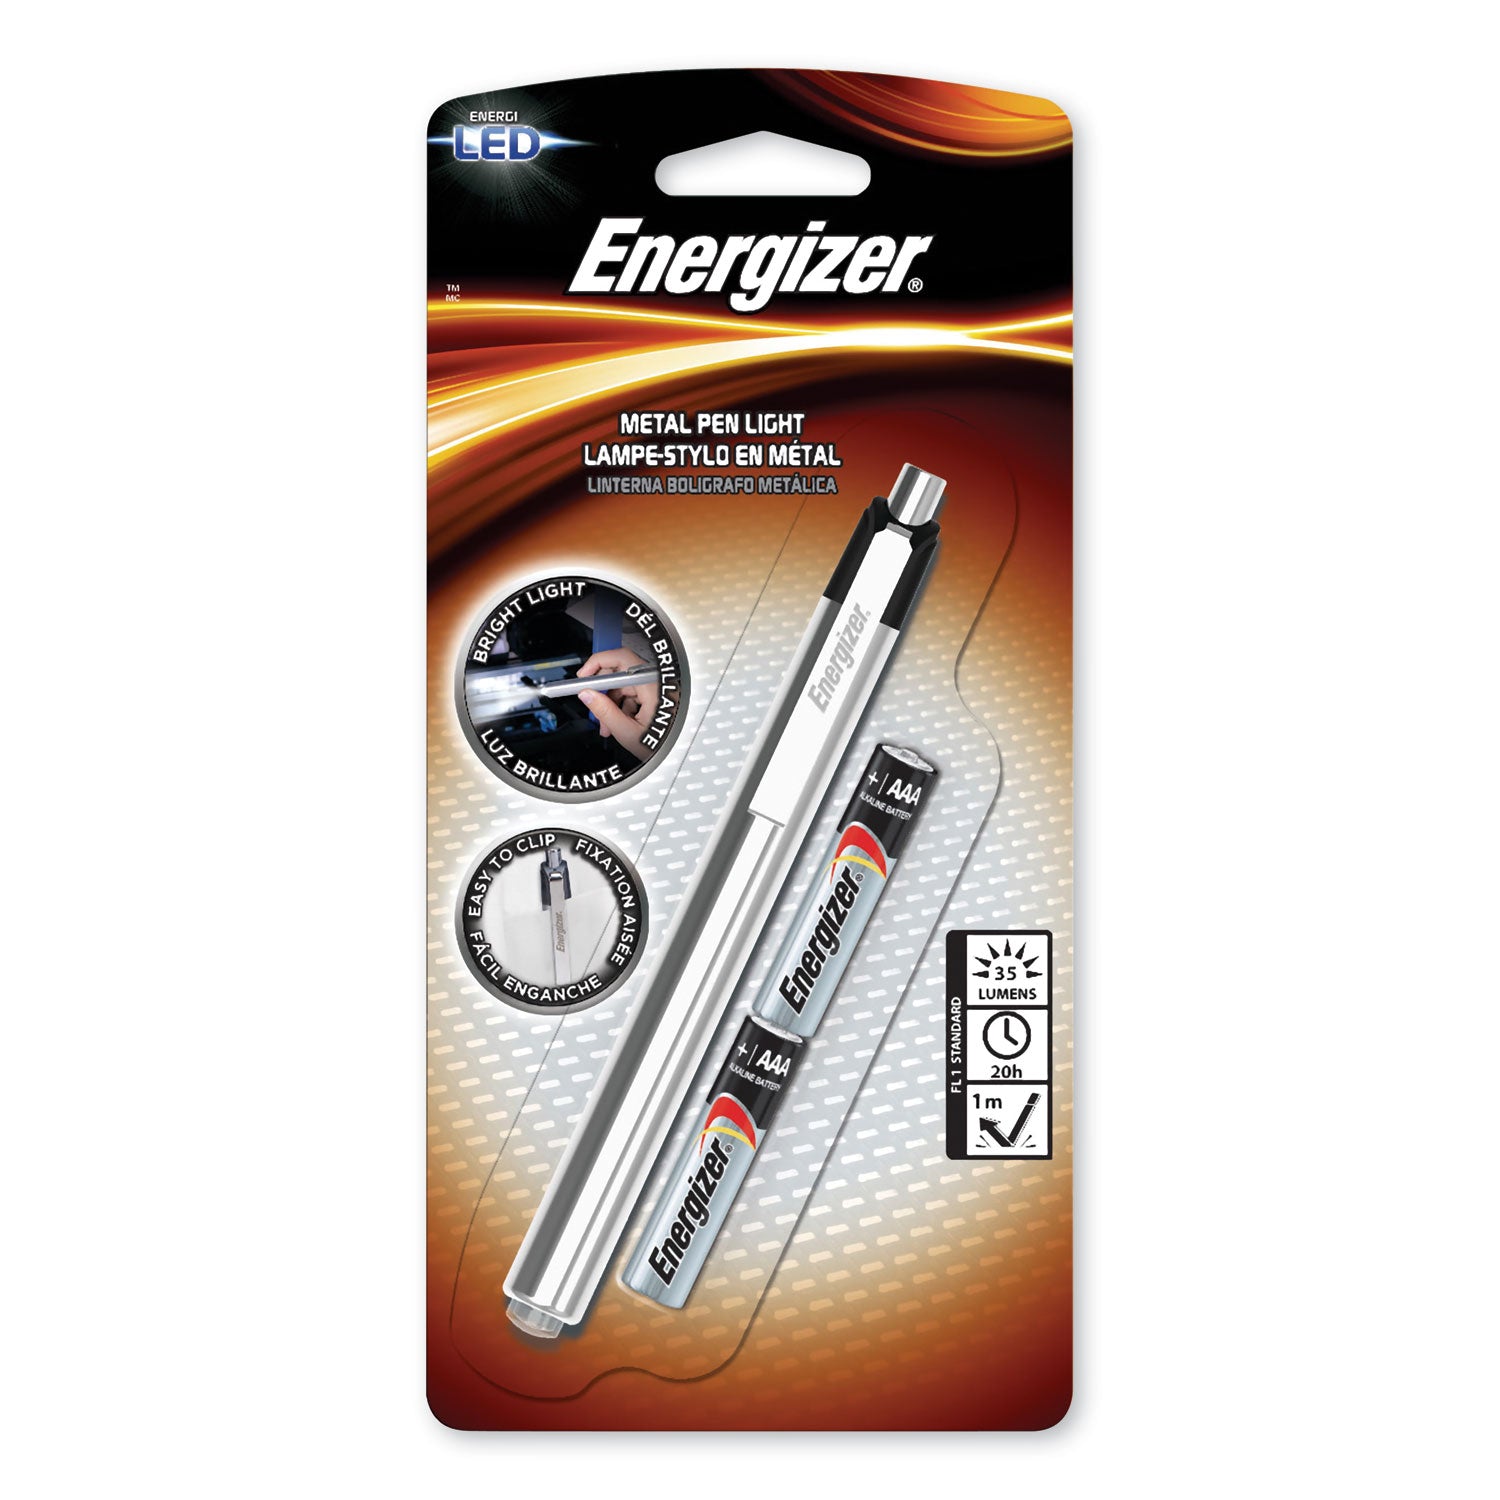 LED Pen Light, 2 AAA Batteries (Included), Silver/Black - 